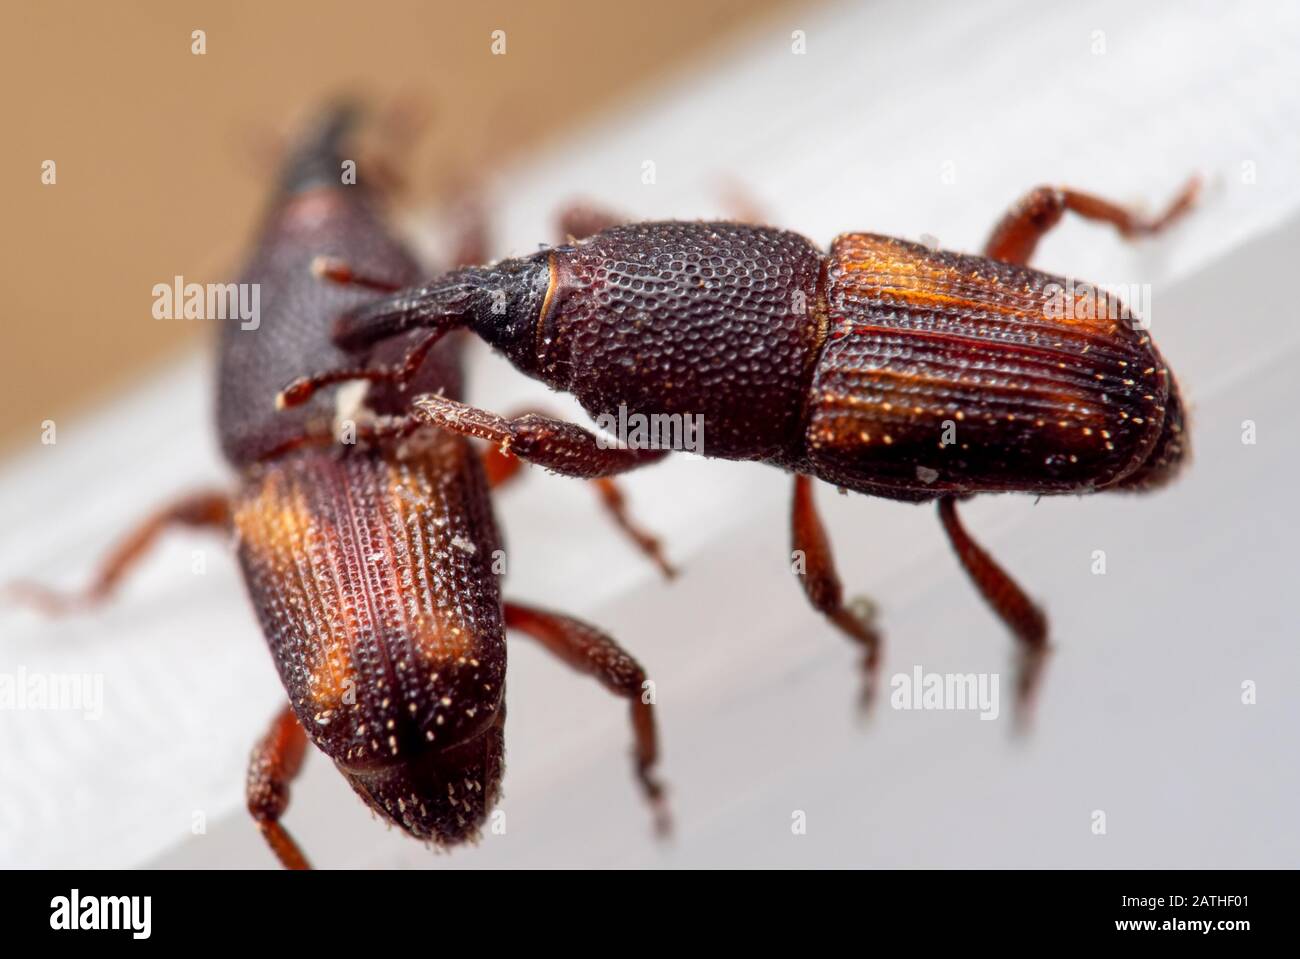 Macro Photography of Two Rice Weevil or Sitophilus Oryzae Stock Photo